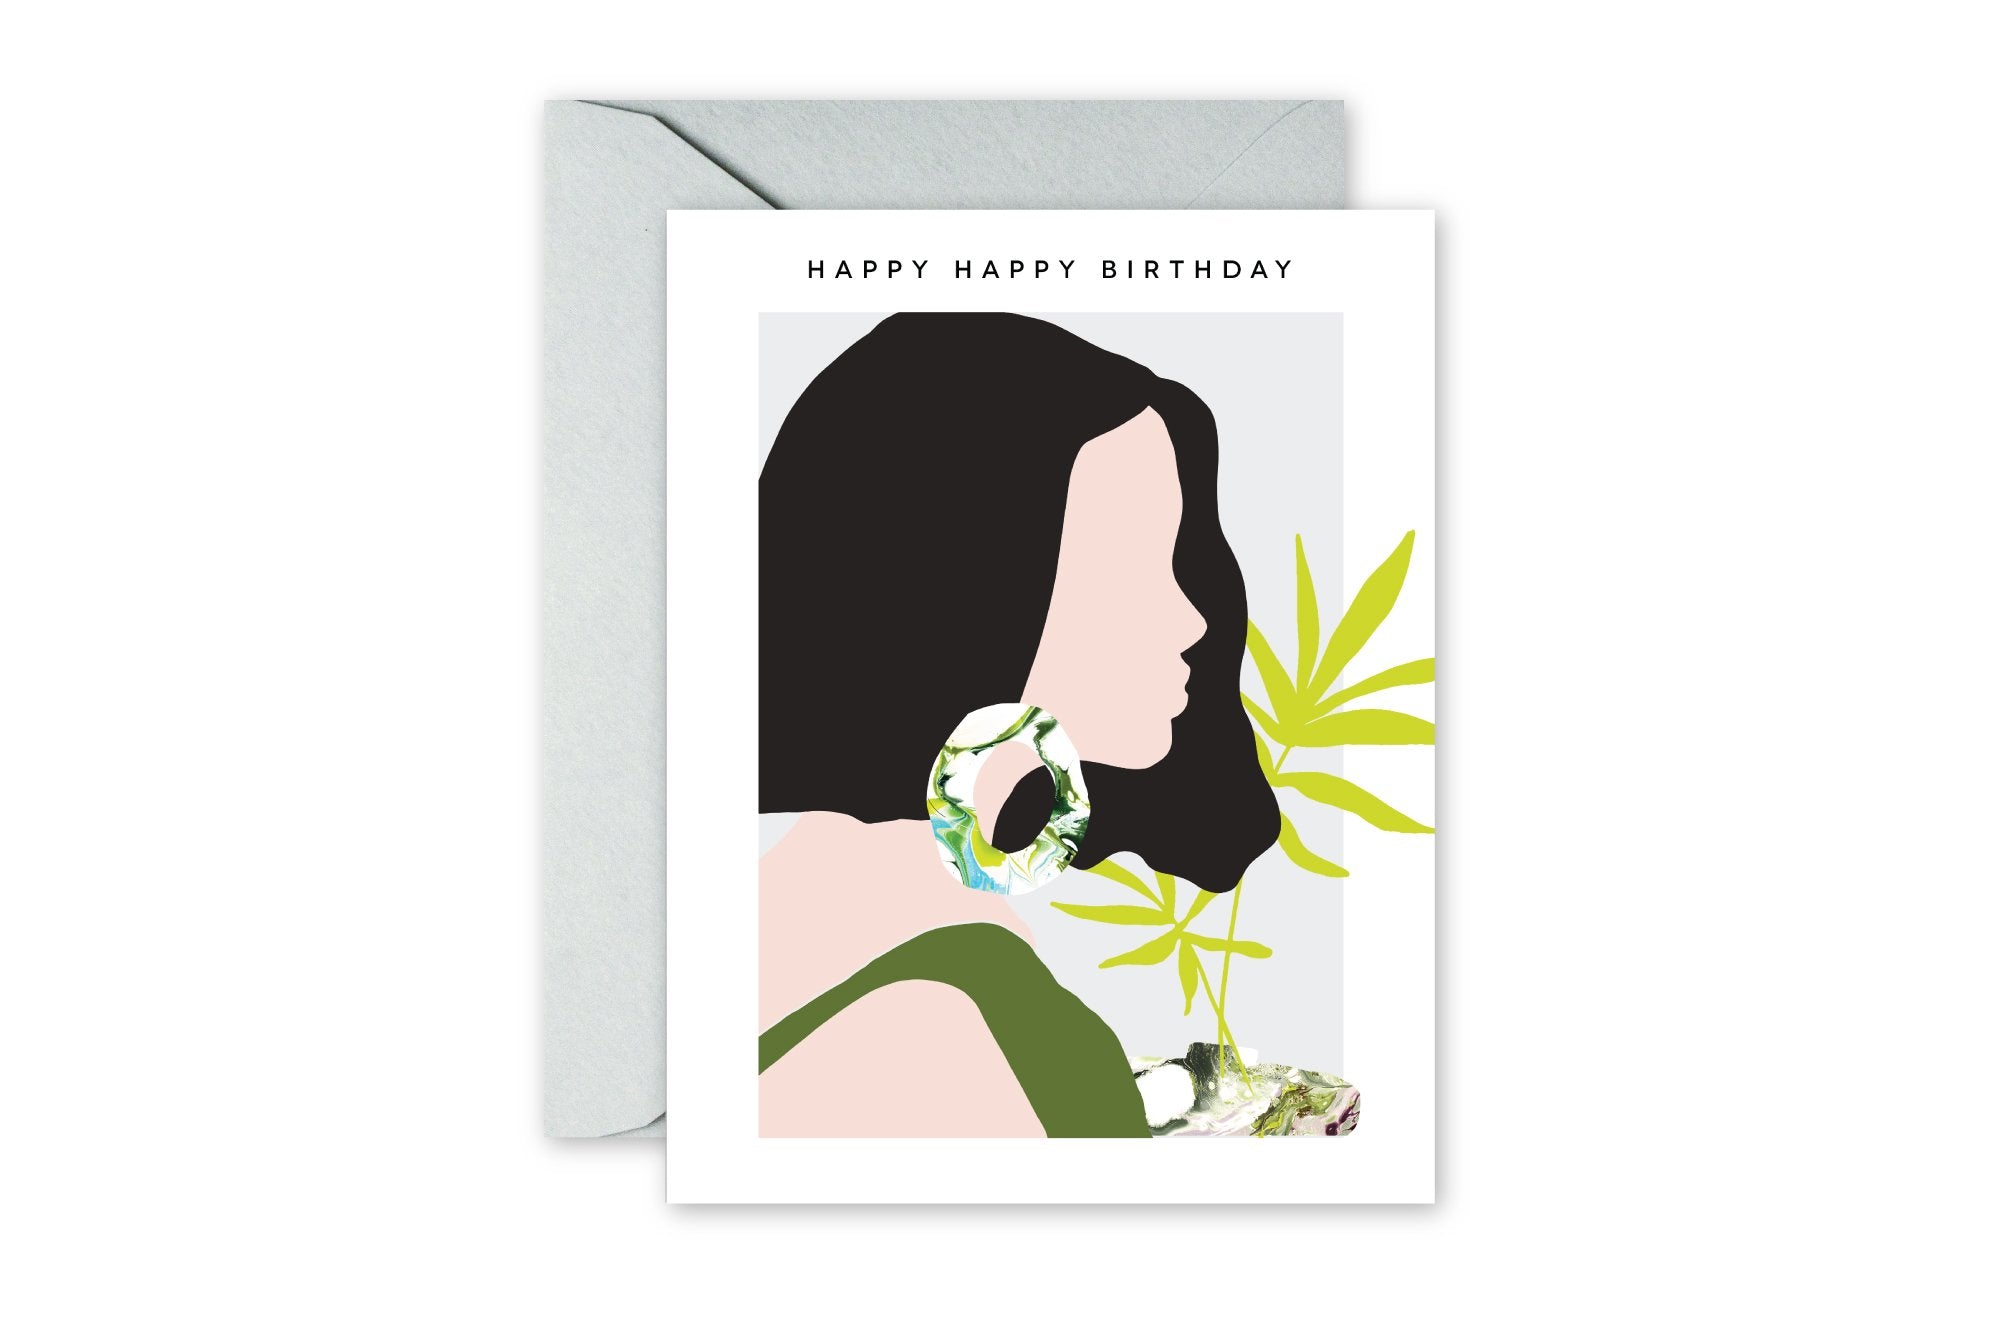 HAPPY BIRTHDAY Marble Earring Silhouette Greeting Card